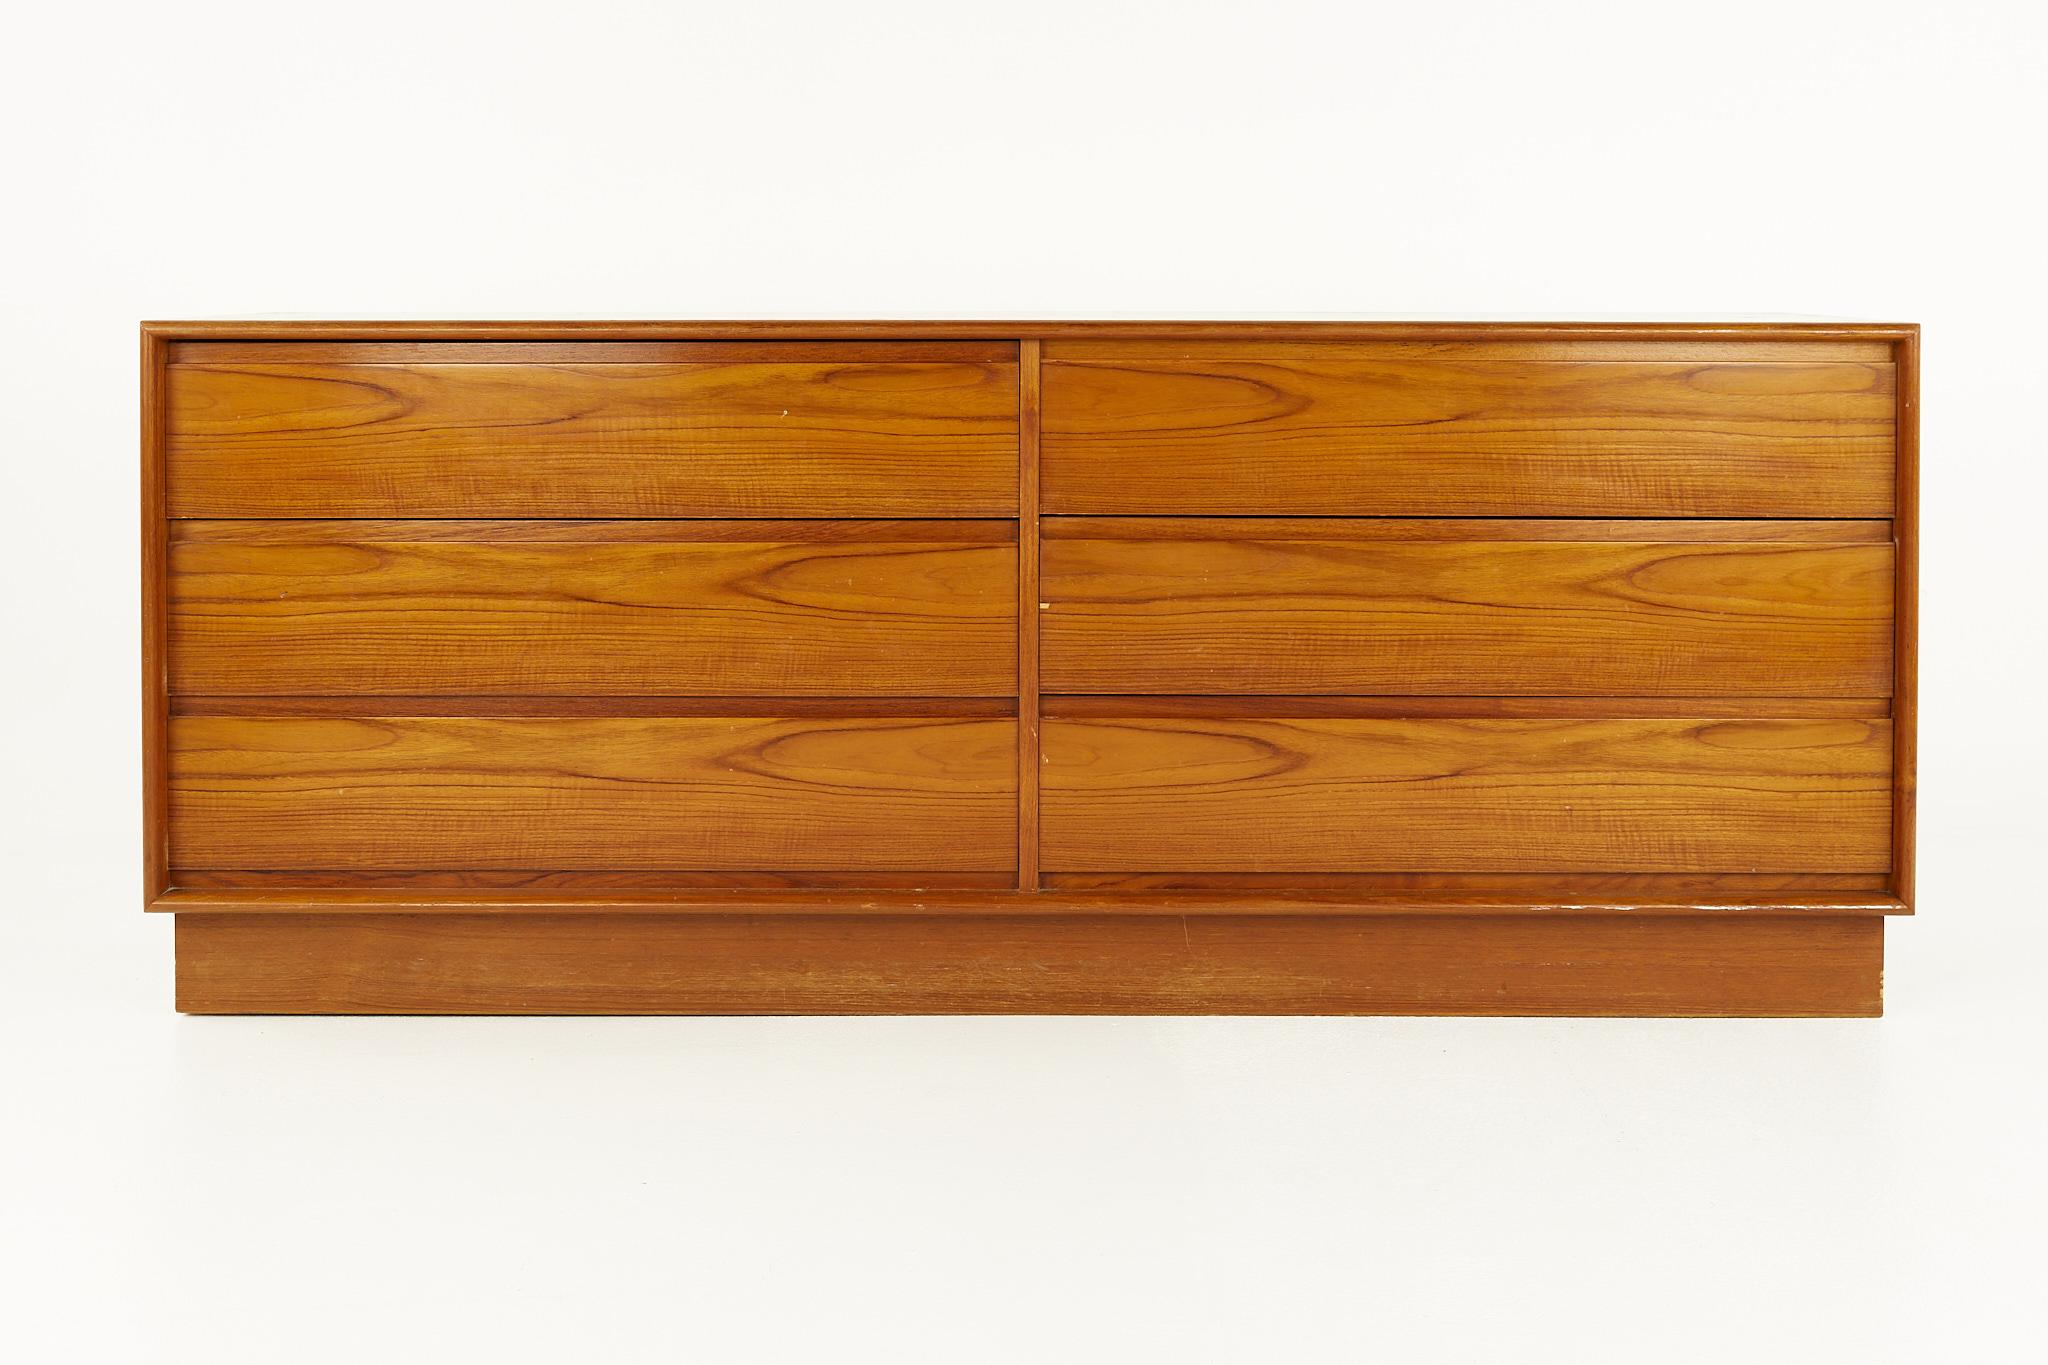 Peter Lovig Nielsen mid century danish teak 6-drawer lowboy dresser

This dresser measures: 71.5 wide x 19 deep x 28.25 inches high

?All pieces of furniture can be had in what we call restored vintage condition. That means the piece is restored